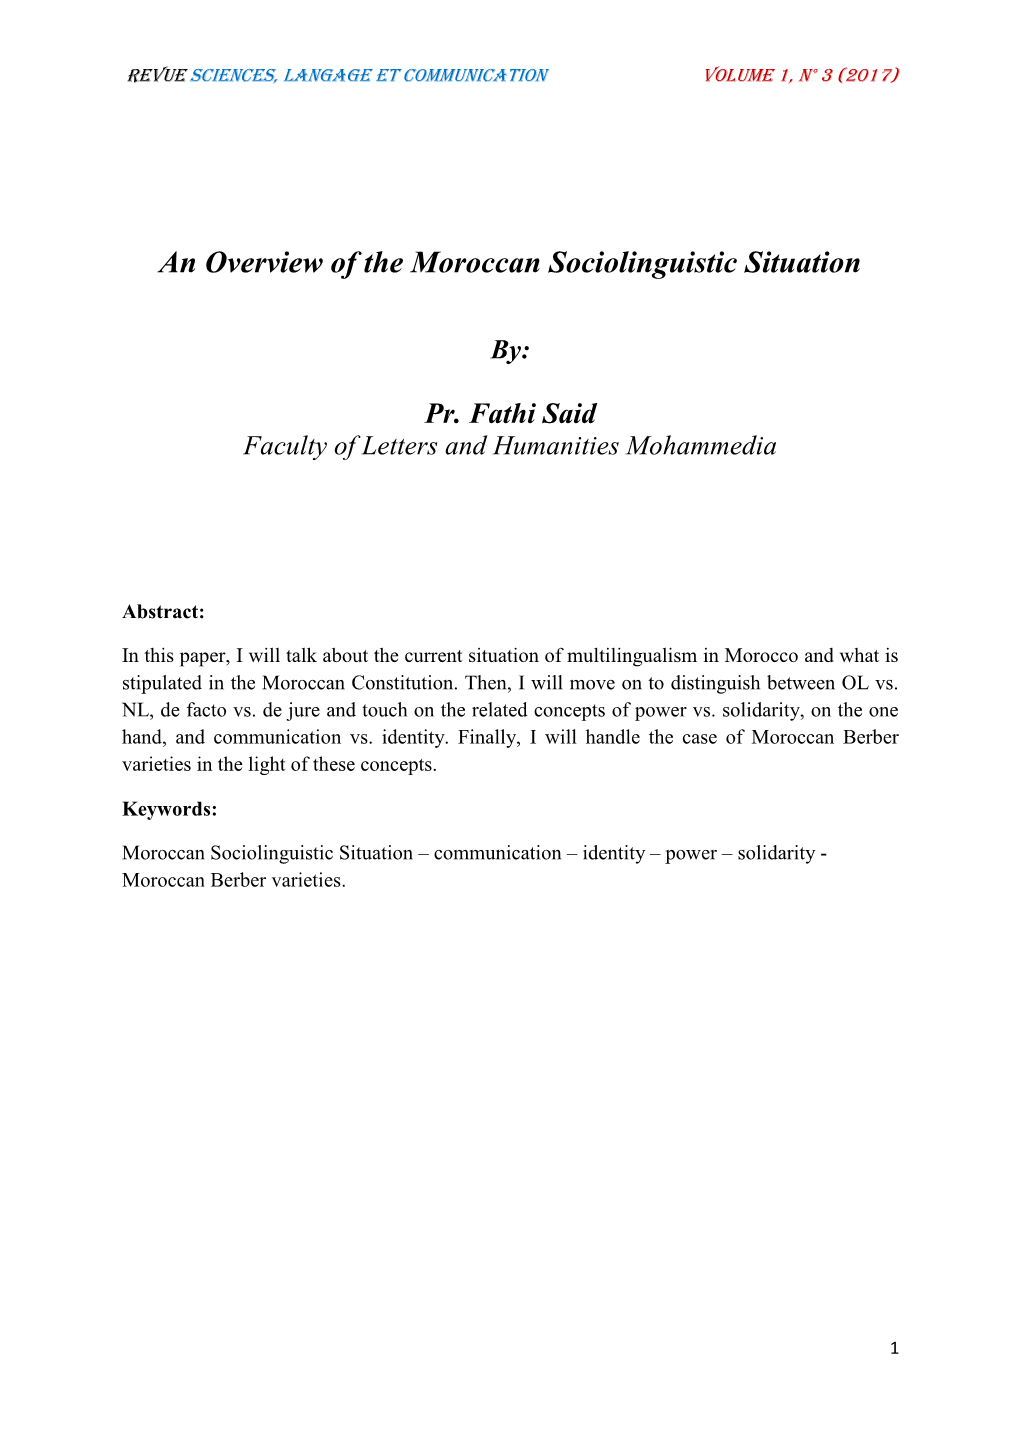 An Overview of the Moroccan Sociolinguistic Situation